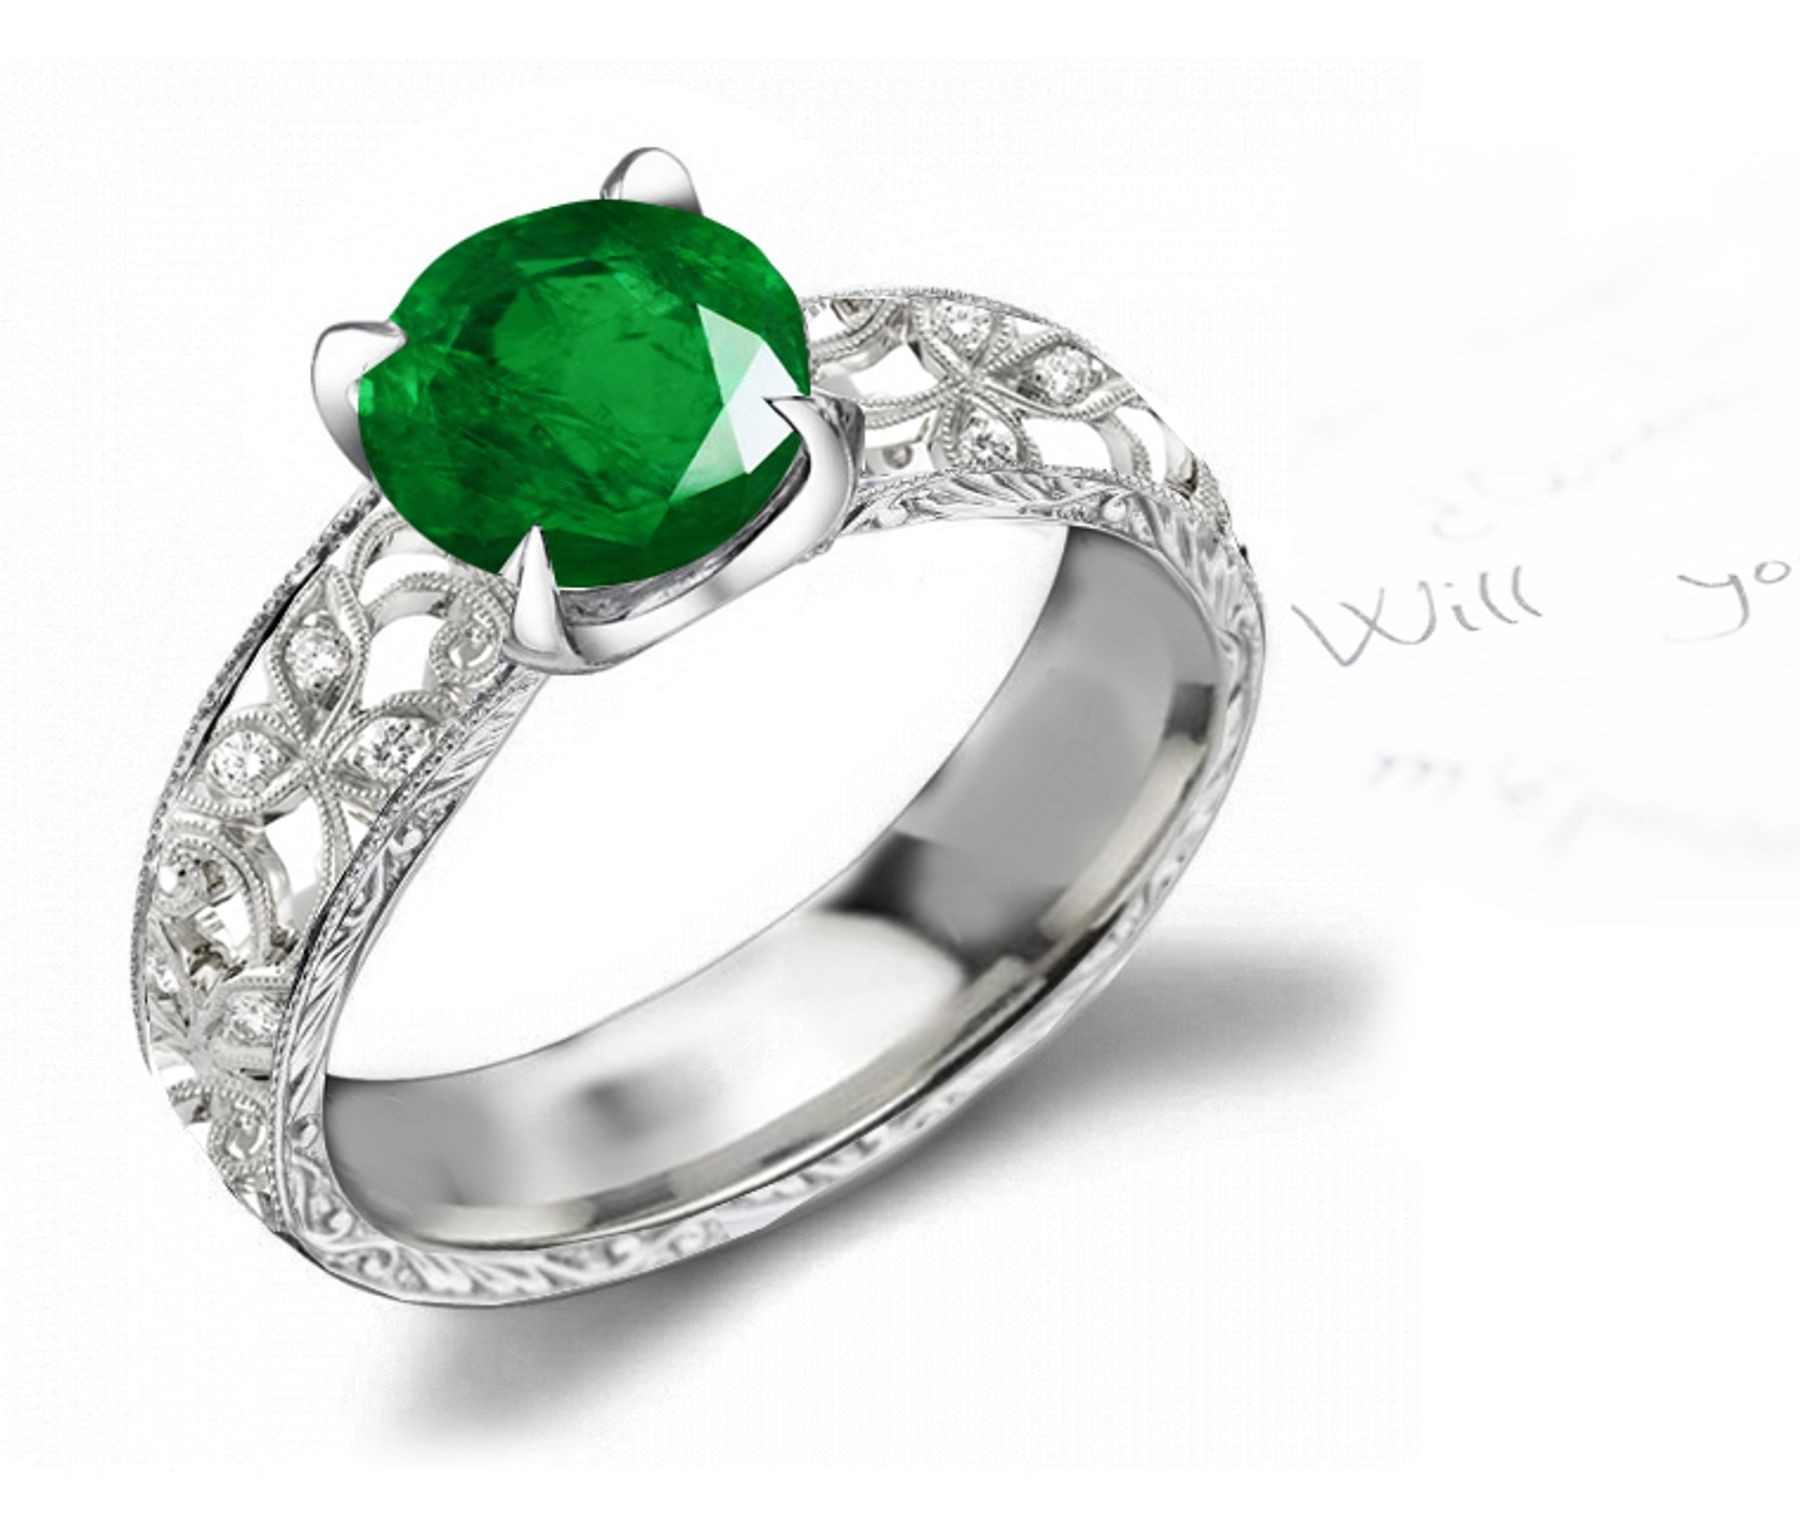 Mesmerizing: Finely Crafted & Brilliant Diamond & Emerald Micropave Granulation Votive Adze Floral Motifs Cloissons Ring